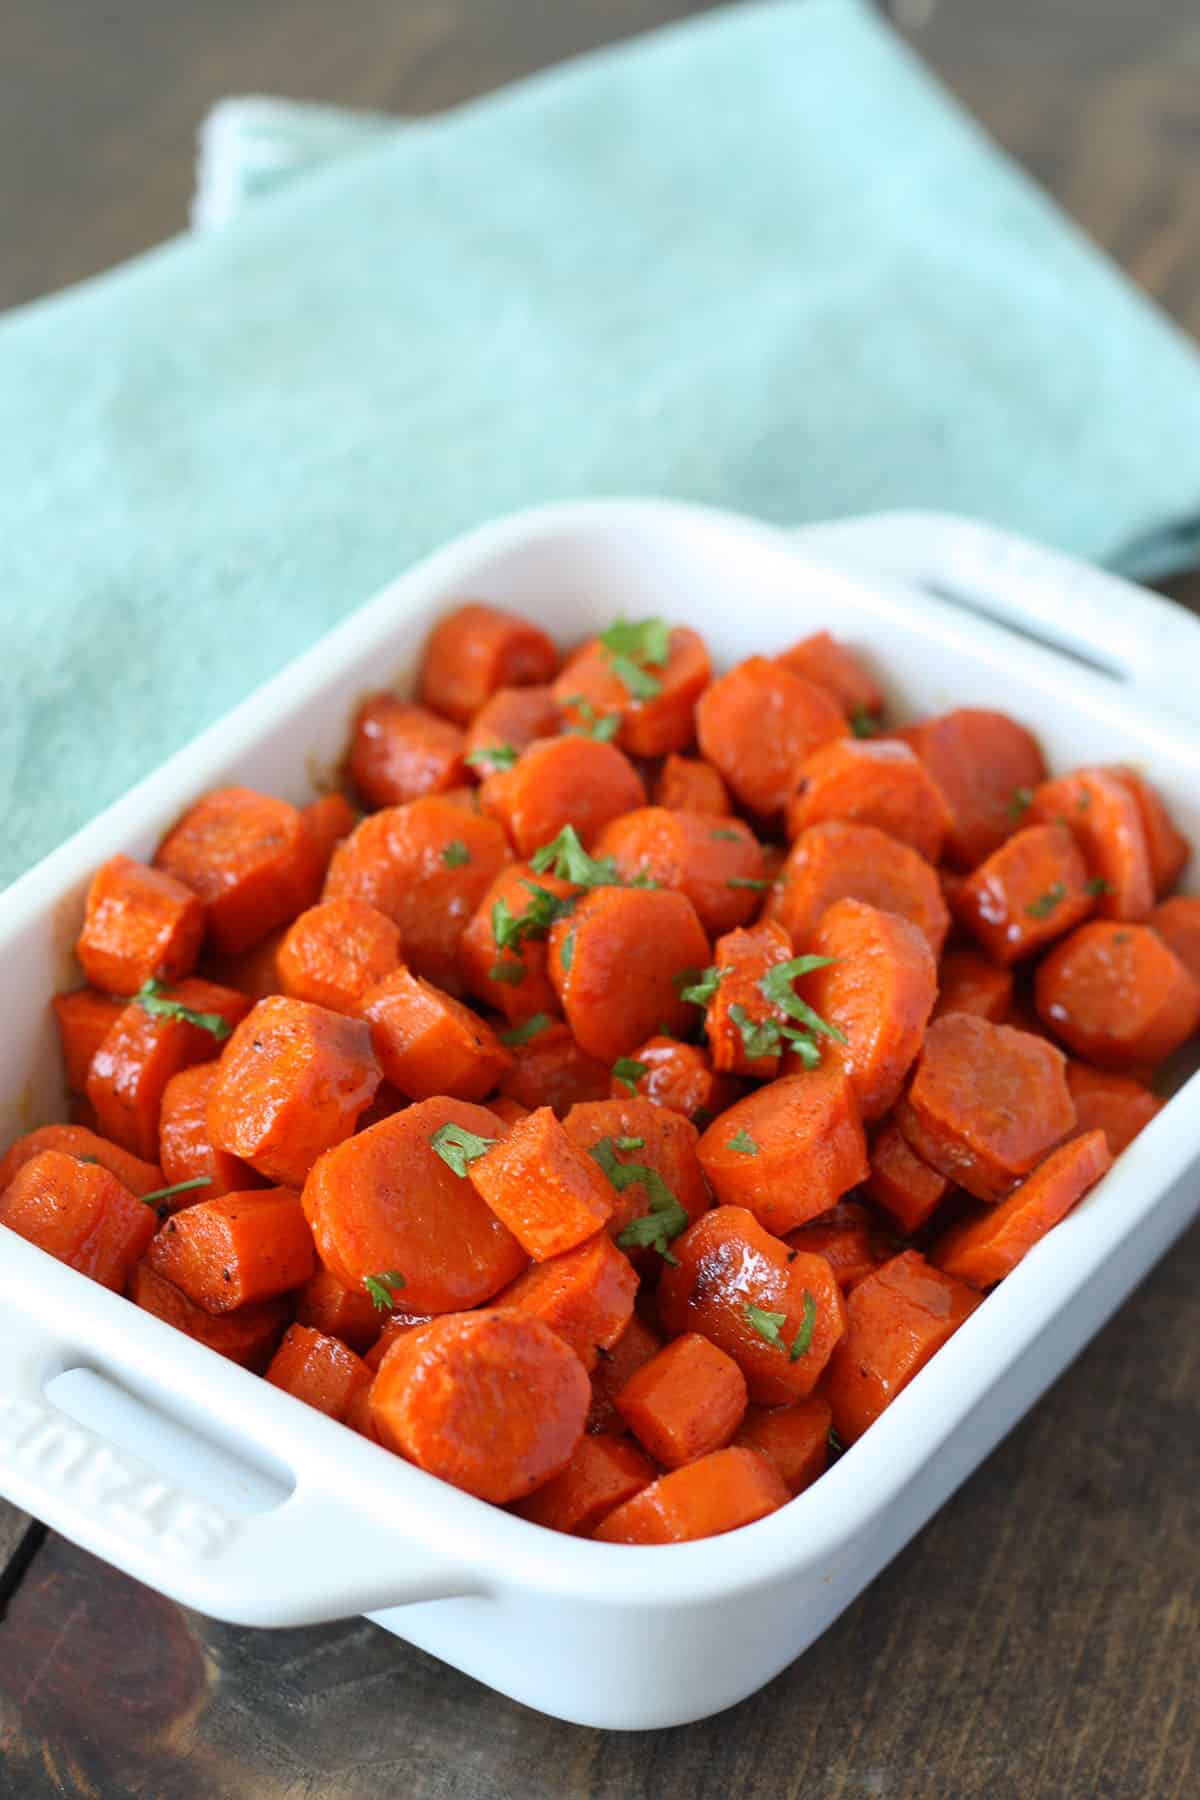 honey glazed carrots cut into coins in a white baking dish with green parsley garnish on top